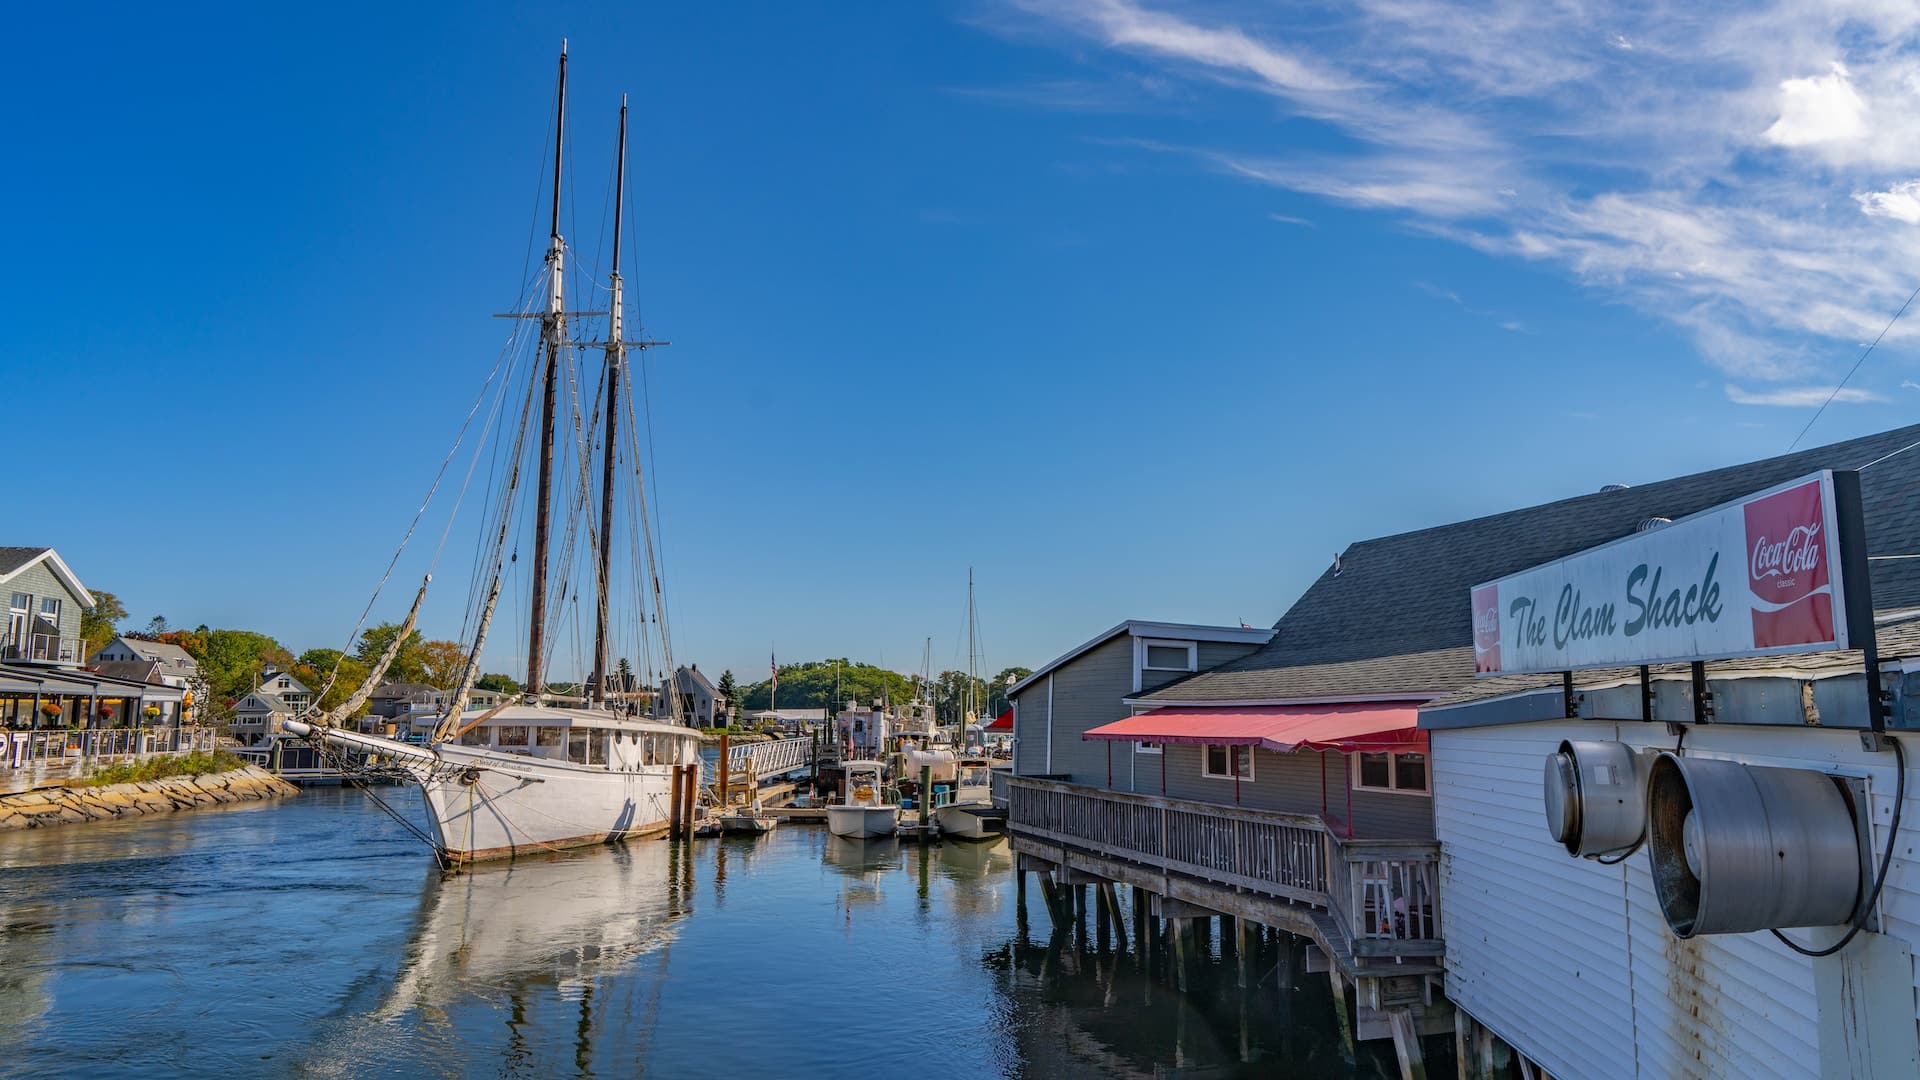 Beautiful Kennebunkport in Maine, USA. You can see a gorgeous sailing boat and a snack bar called The Clam Shack, which is up on stilts.